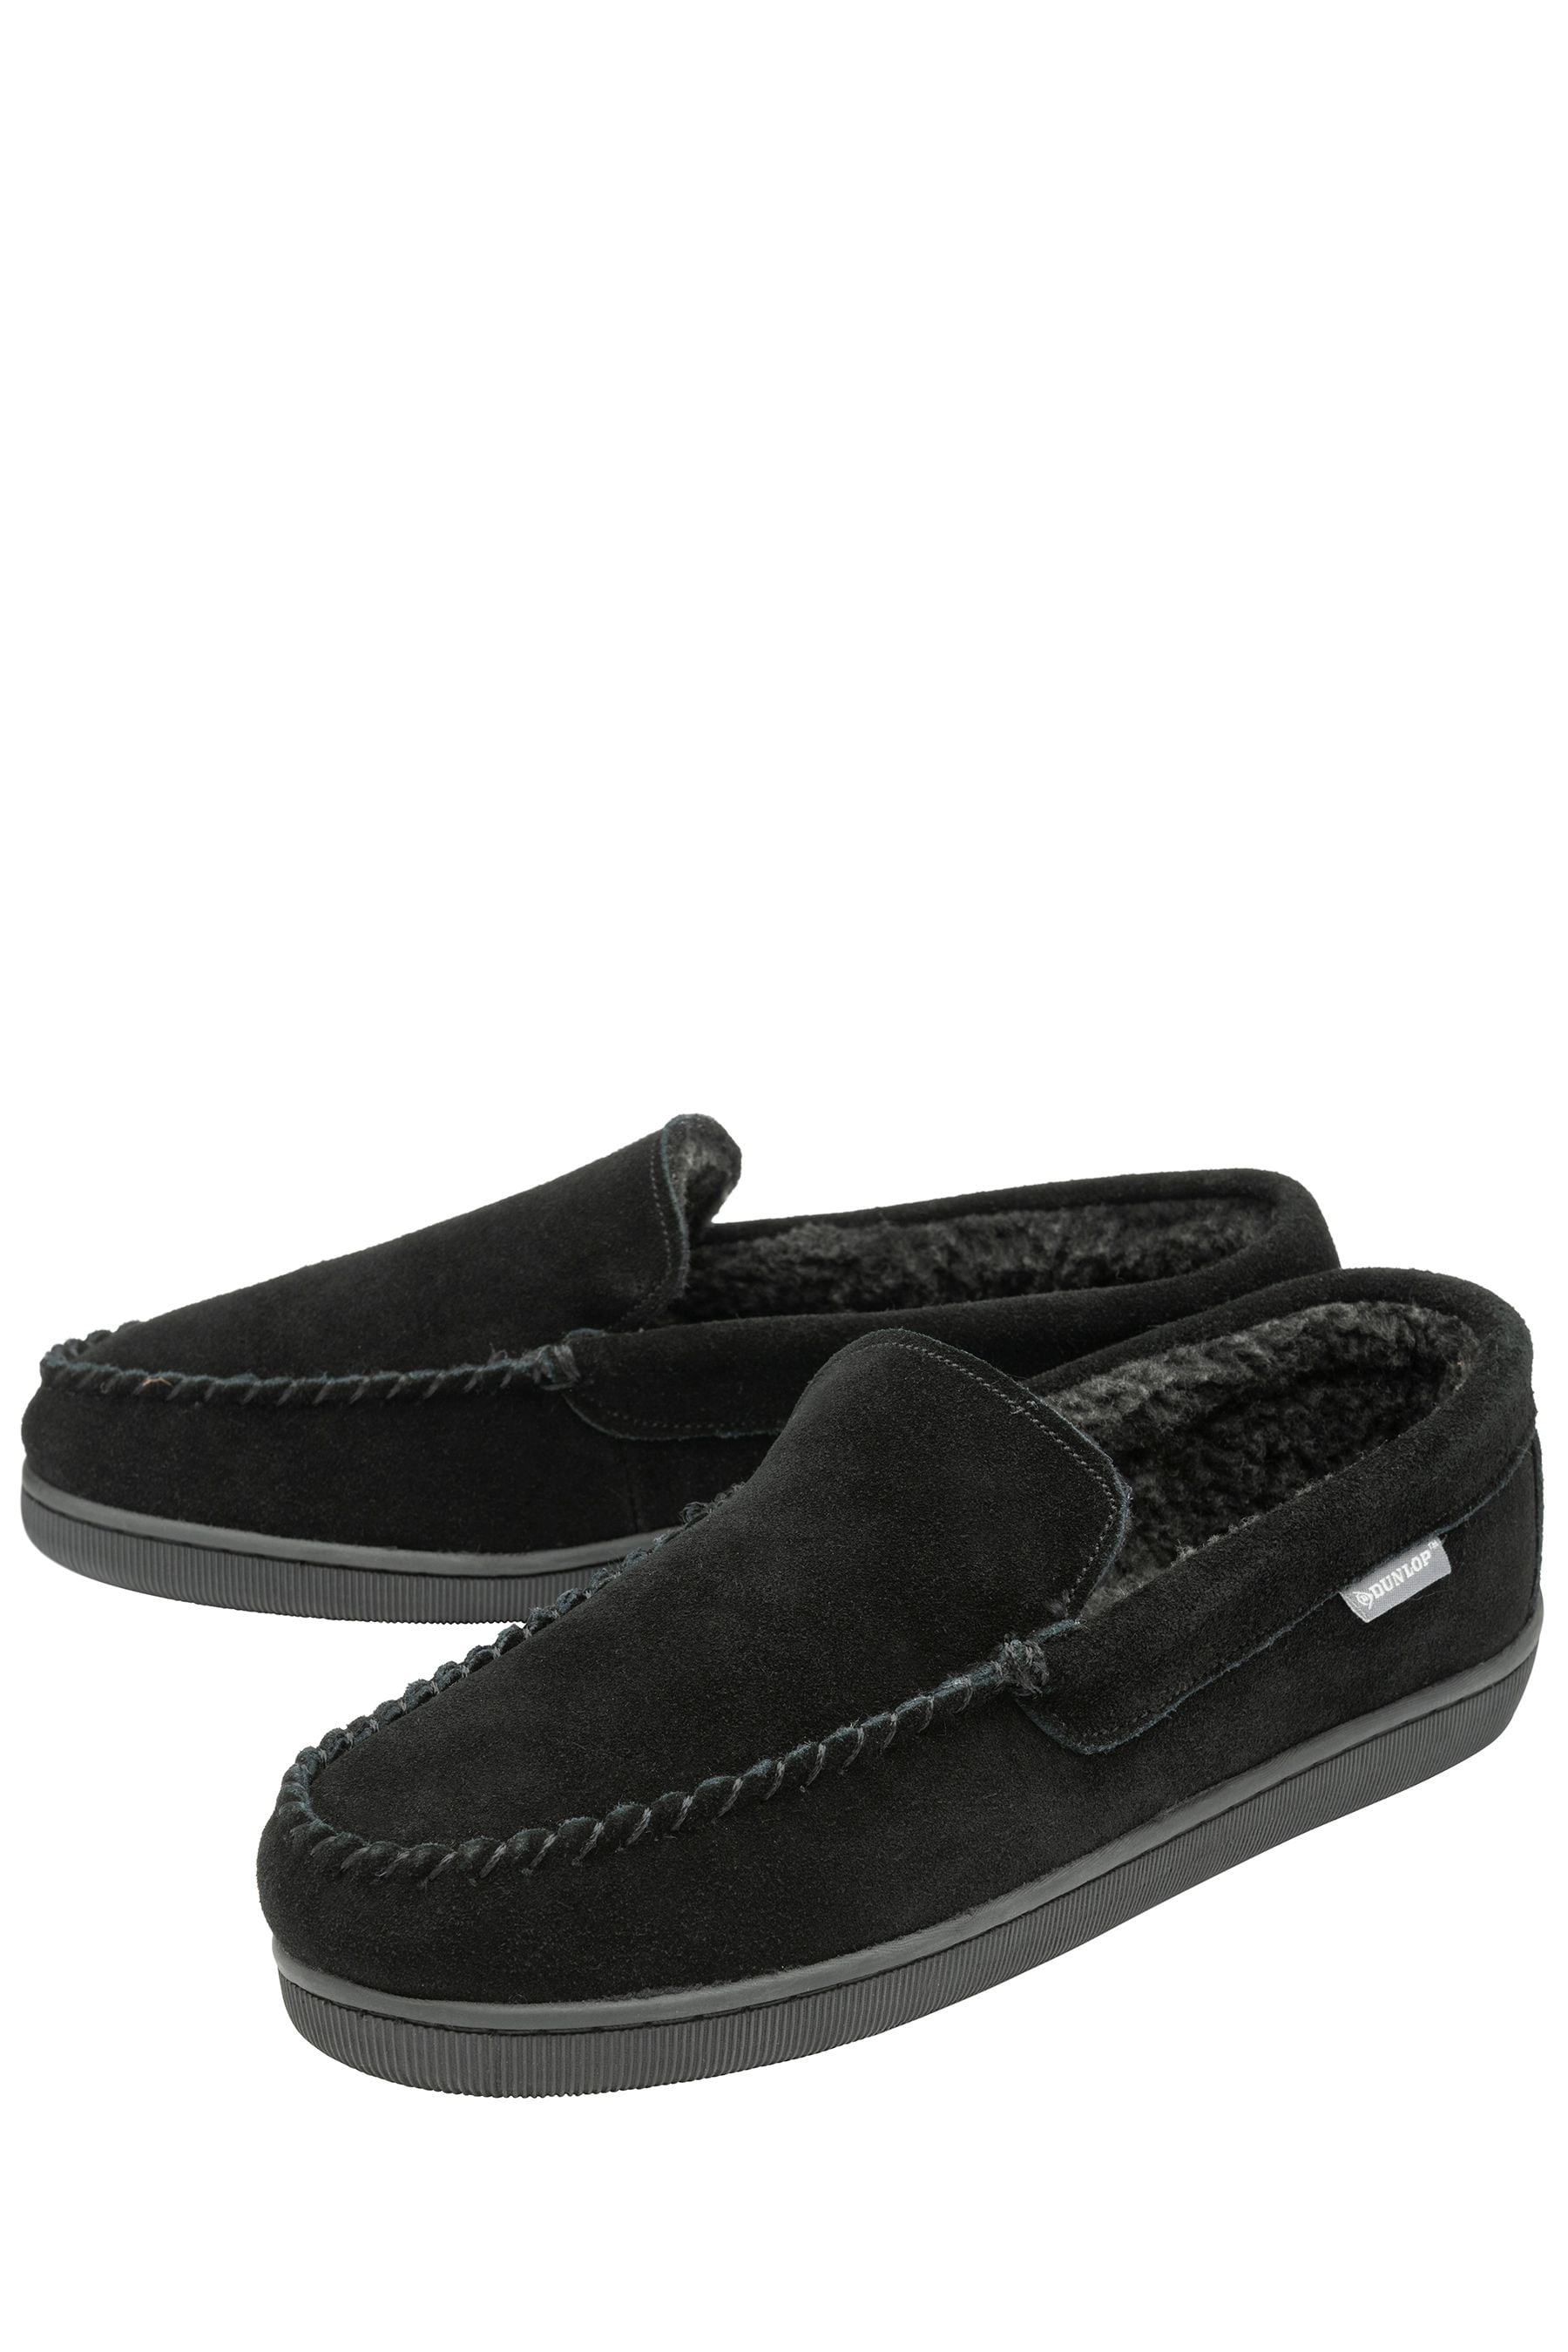 Buy Dunlop Black Full Shoes Faux Fur Lined Mens Slippers from the Next ...